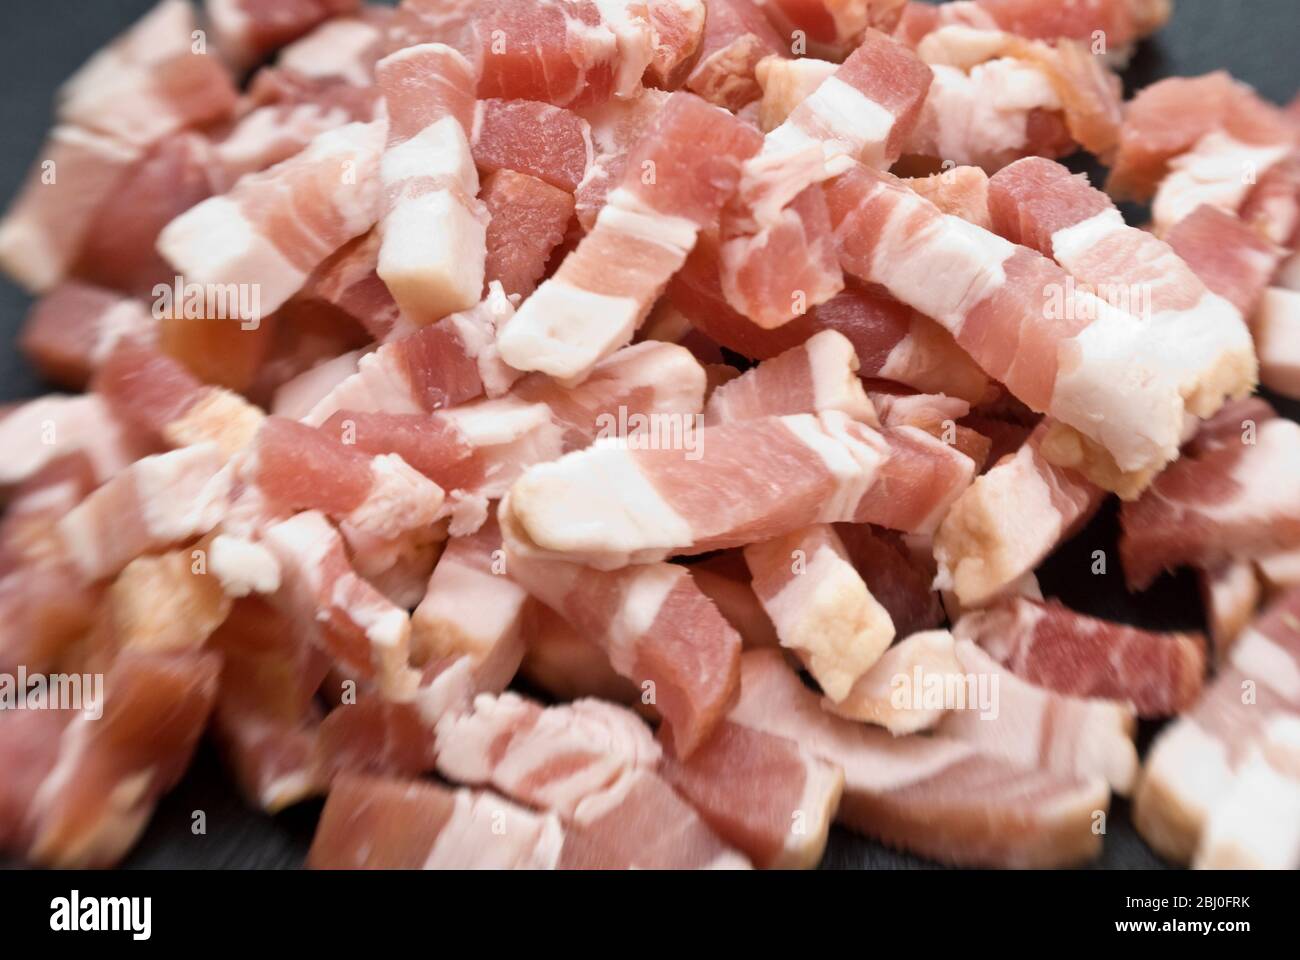 Chopped pieces of streaky bacon known as pancetta in Italy and lardons in France - Stock Photo